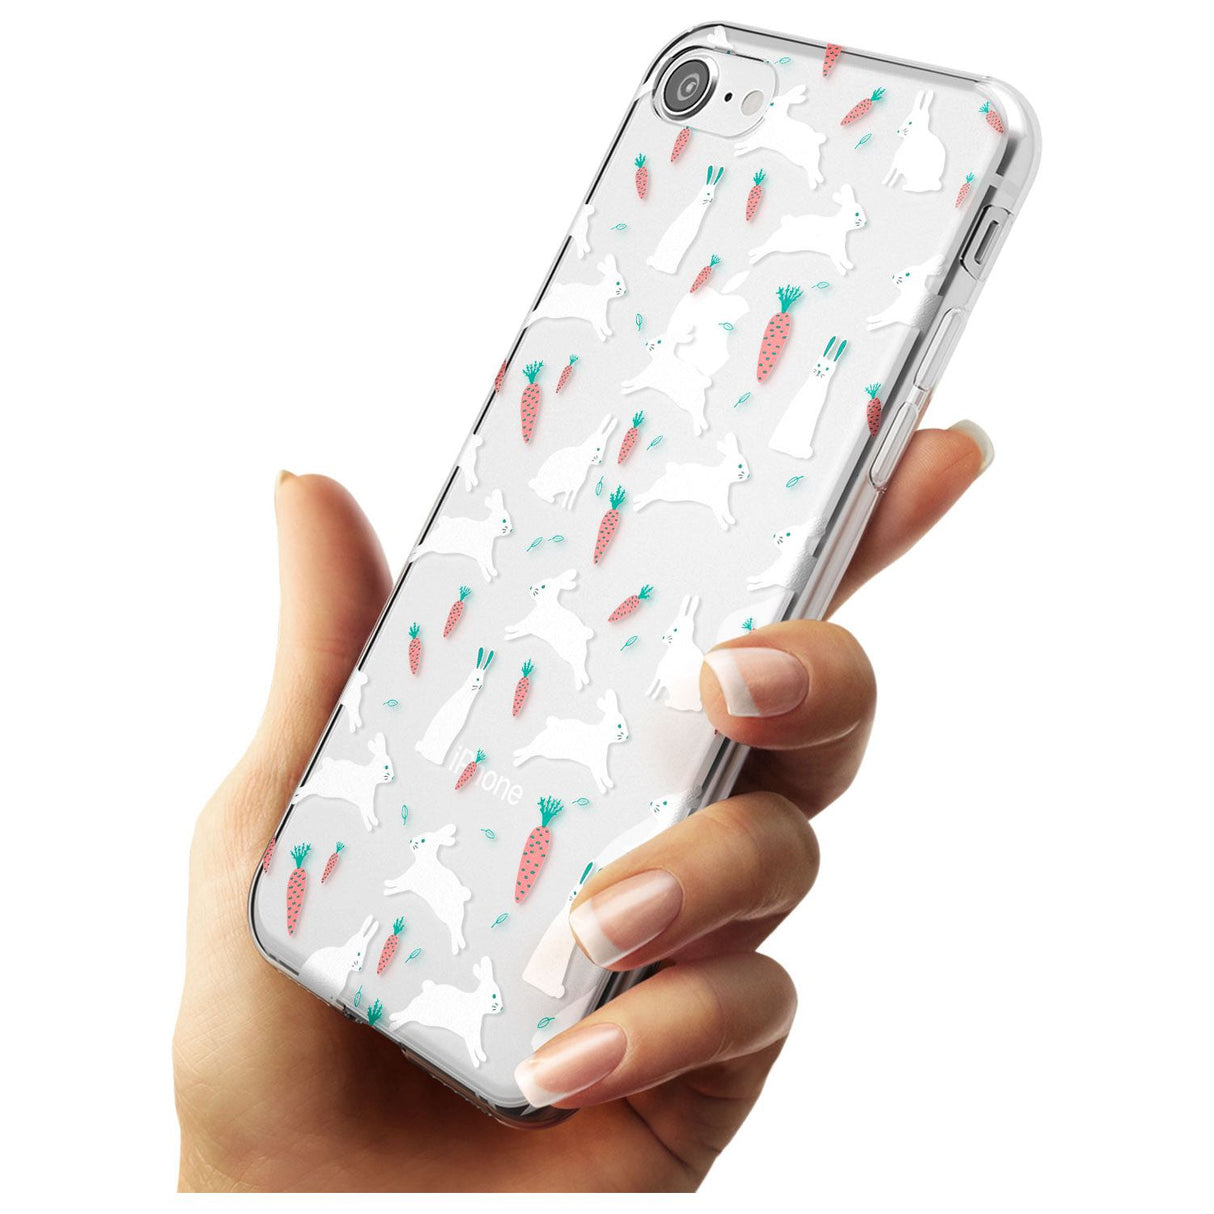 White Bunnies and Carrots Slim TPU Phone Case for iPhone SE 8 7 Plus